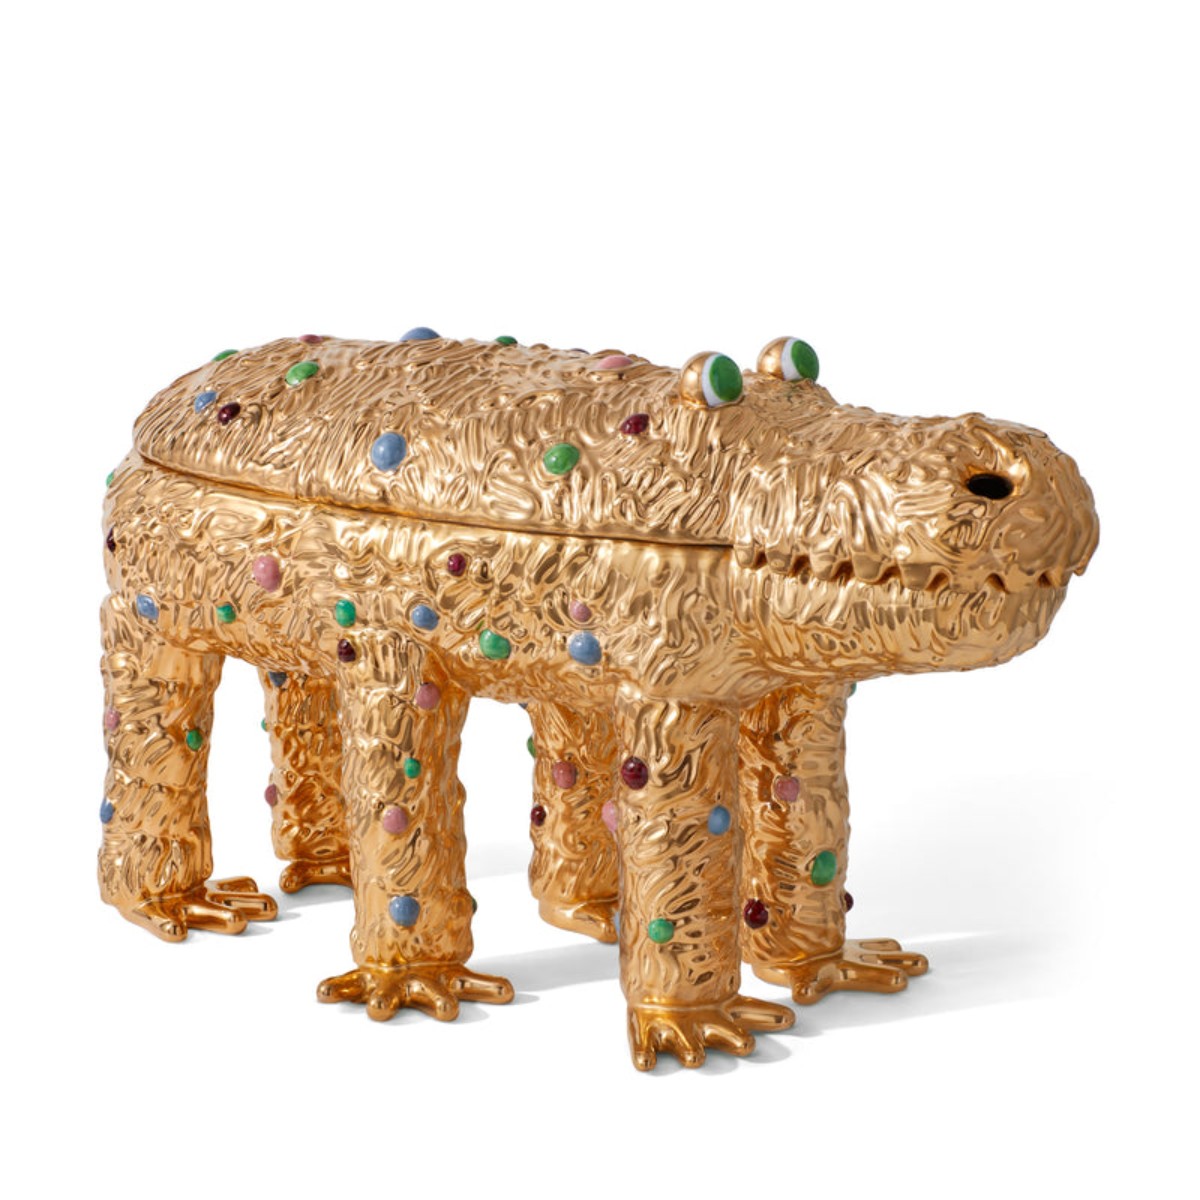 L’Objet | HAAS Brothers | Haas Pedro the Croc Box - Limited Edition of 100